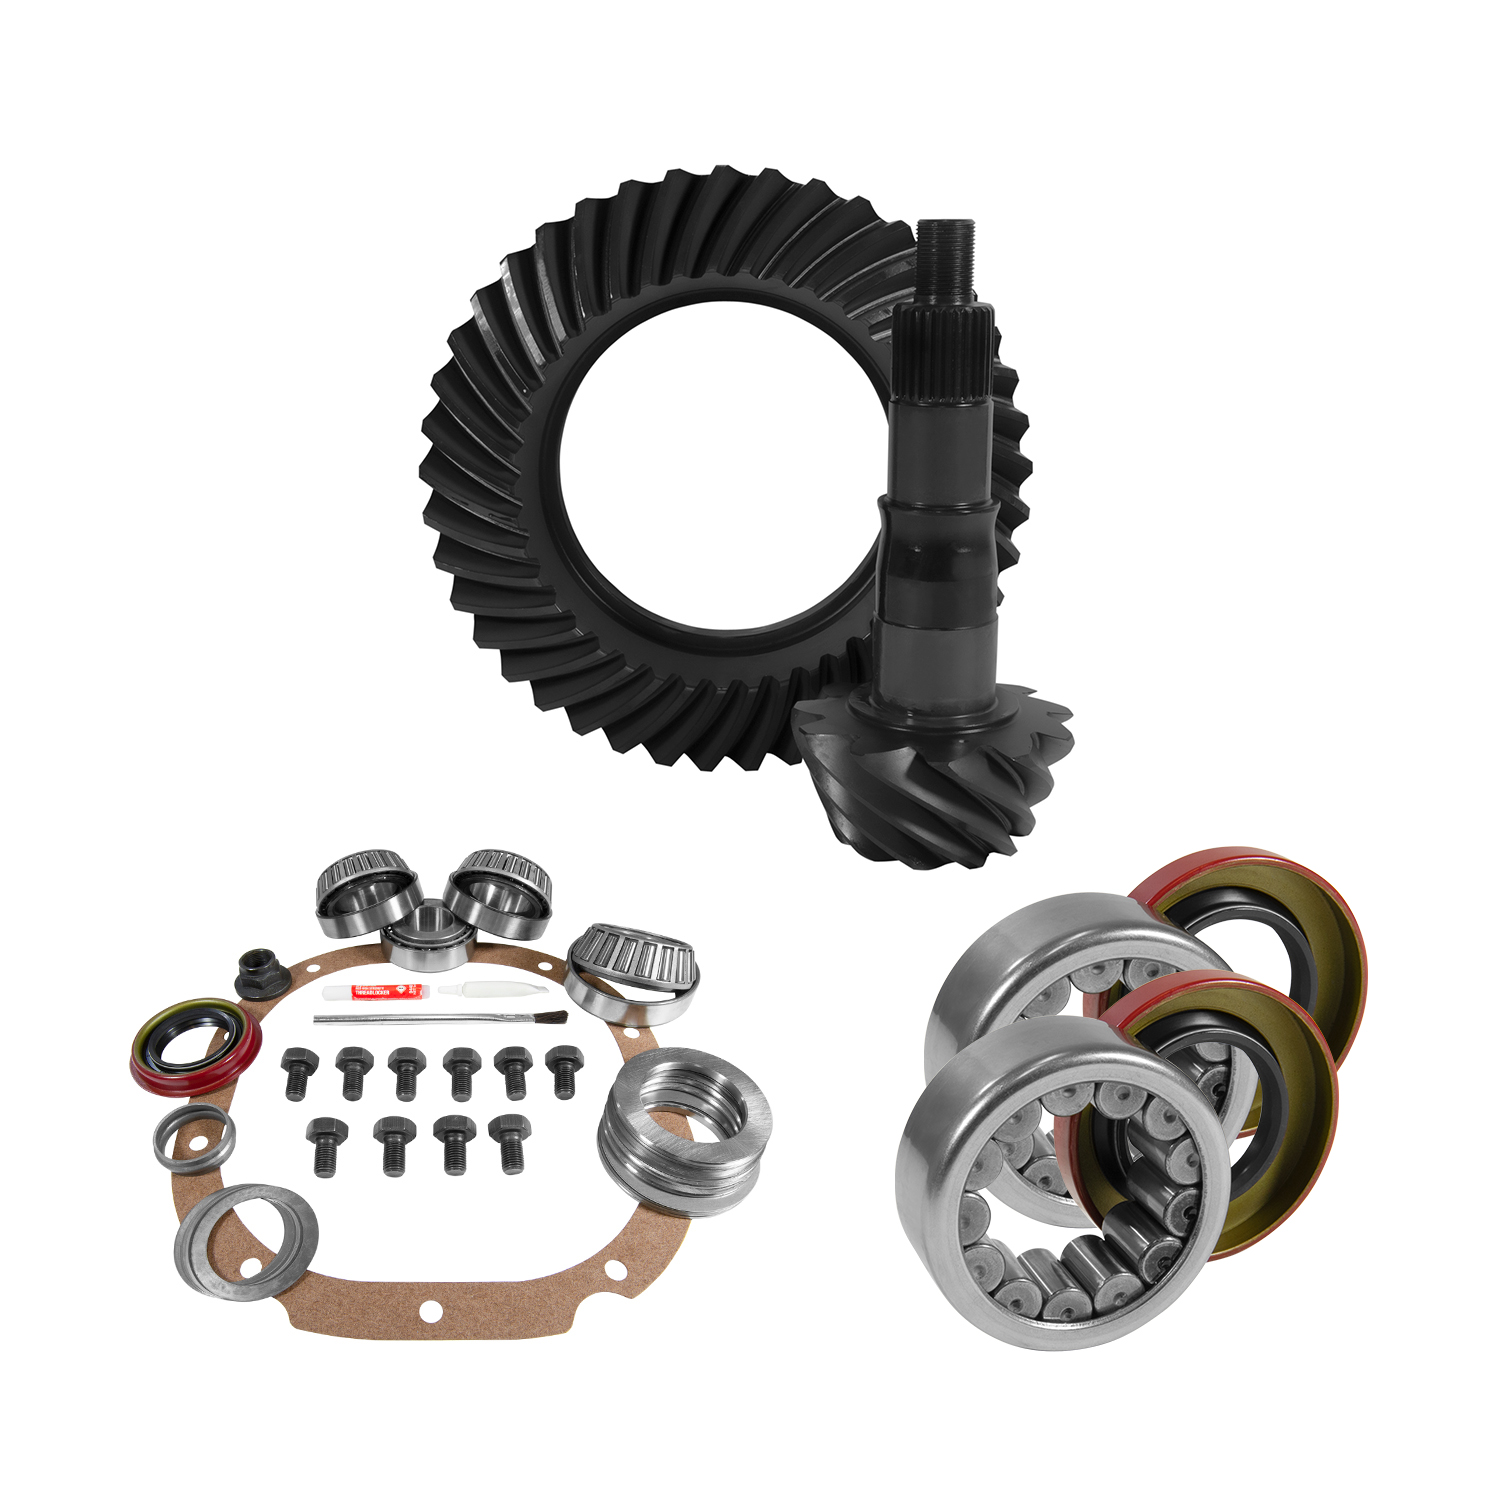 USA Standard 10779 8.8 in. Ford 4.56 Rear Ring & Pinion Install Kit, 2.99 in. Od Axle Bearings & Seals